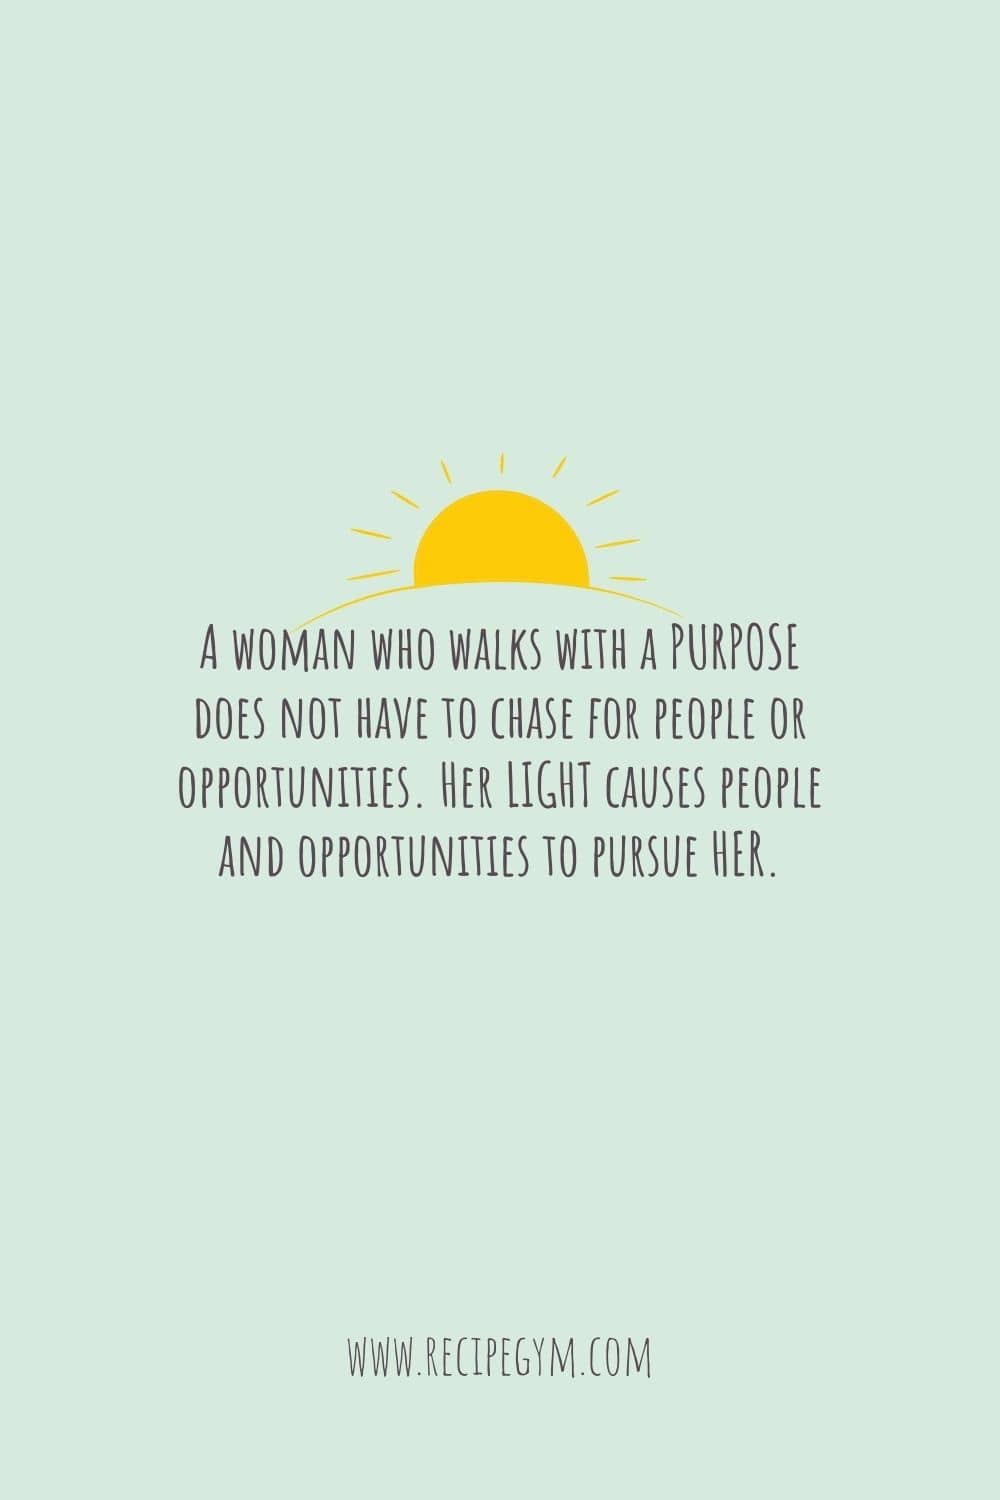 A woman who walks with a PURPOSE does not have to chase for people or opportunities. Her LIGHT causes people and opportunities to pursue HER